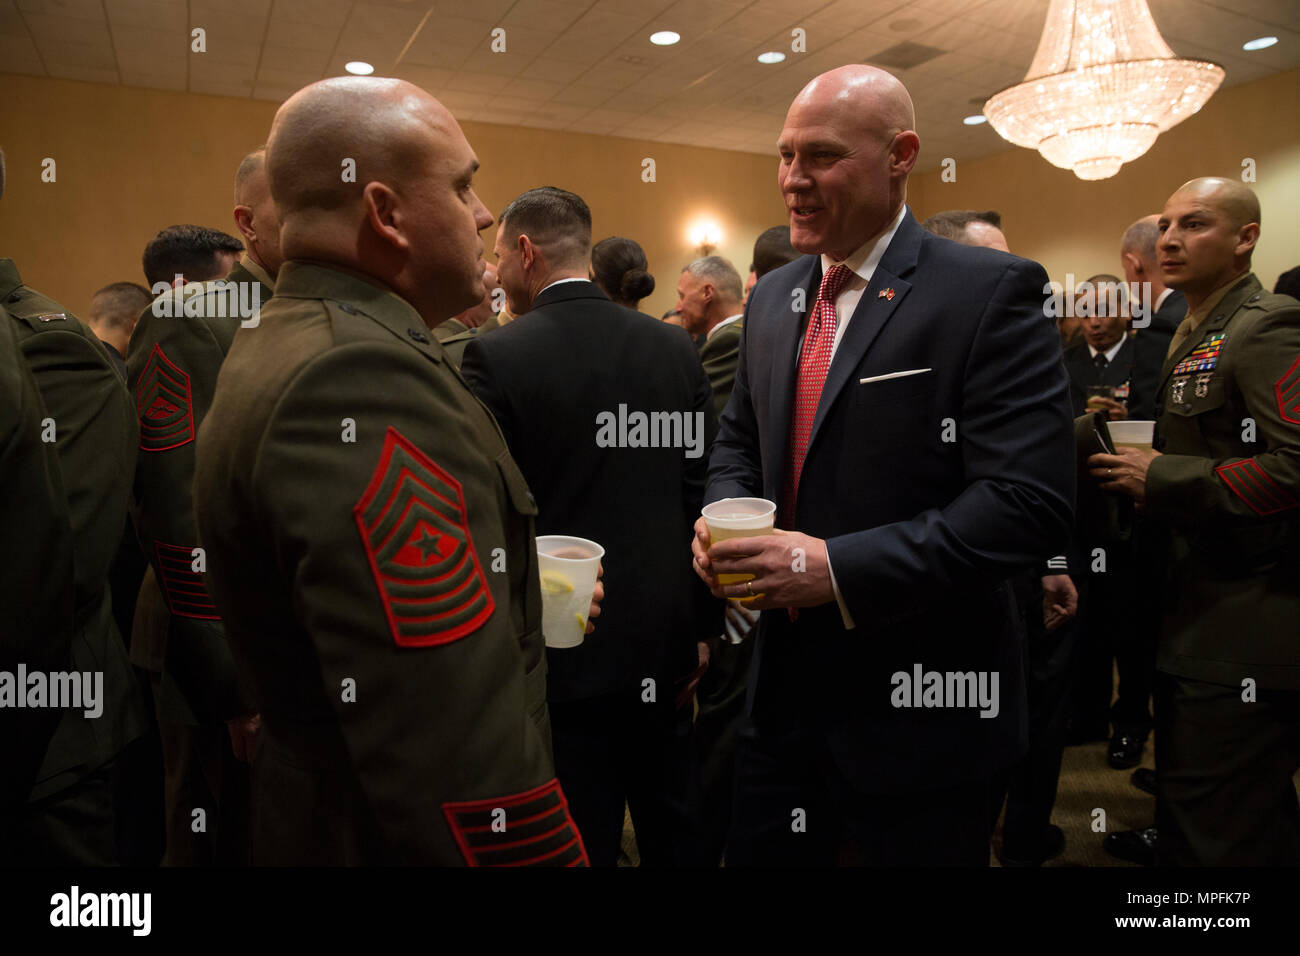 Sgt. Maj. Micheal Barrett (ret.), right, speaks to Marines and Sailors with 1st Marine Logistics Group during the 1st MLG Officer and Staff Noncommissioned Officer Mess Night at Camp Pendleton, Calif., March 3, 2017. Barrett, the 17th Sergeant Major of the Marine Corps, was the honored guest at the mess night, an event designed to foster camaraderie and esprit de corps. (U.S. Marine Corps photo by Sgt. Abbey Perria) Stock Photo